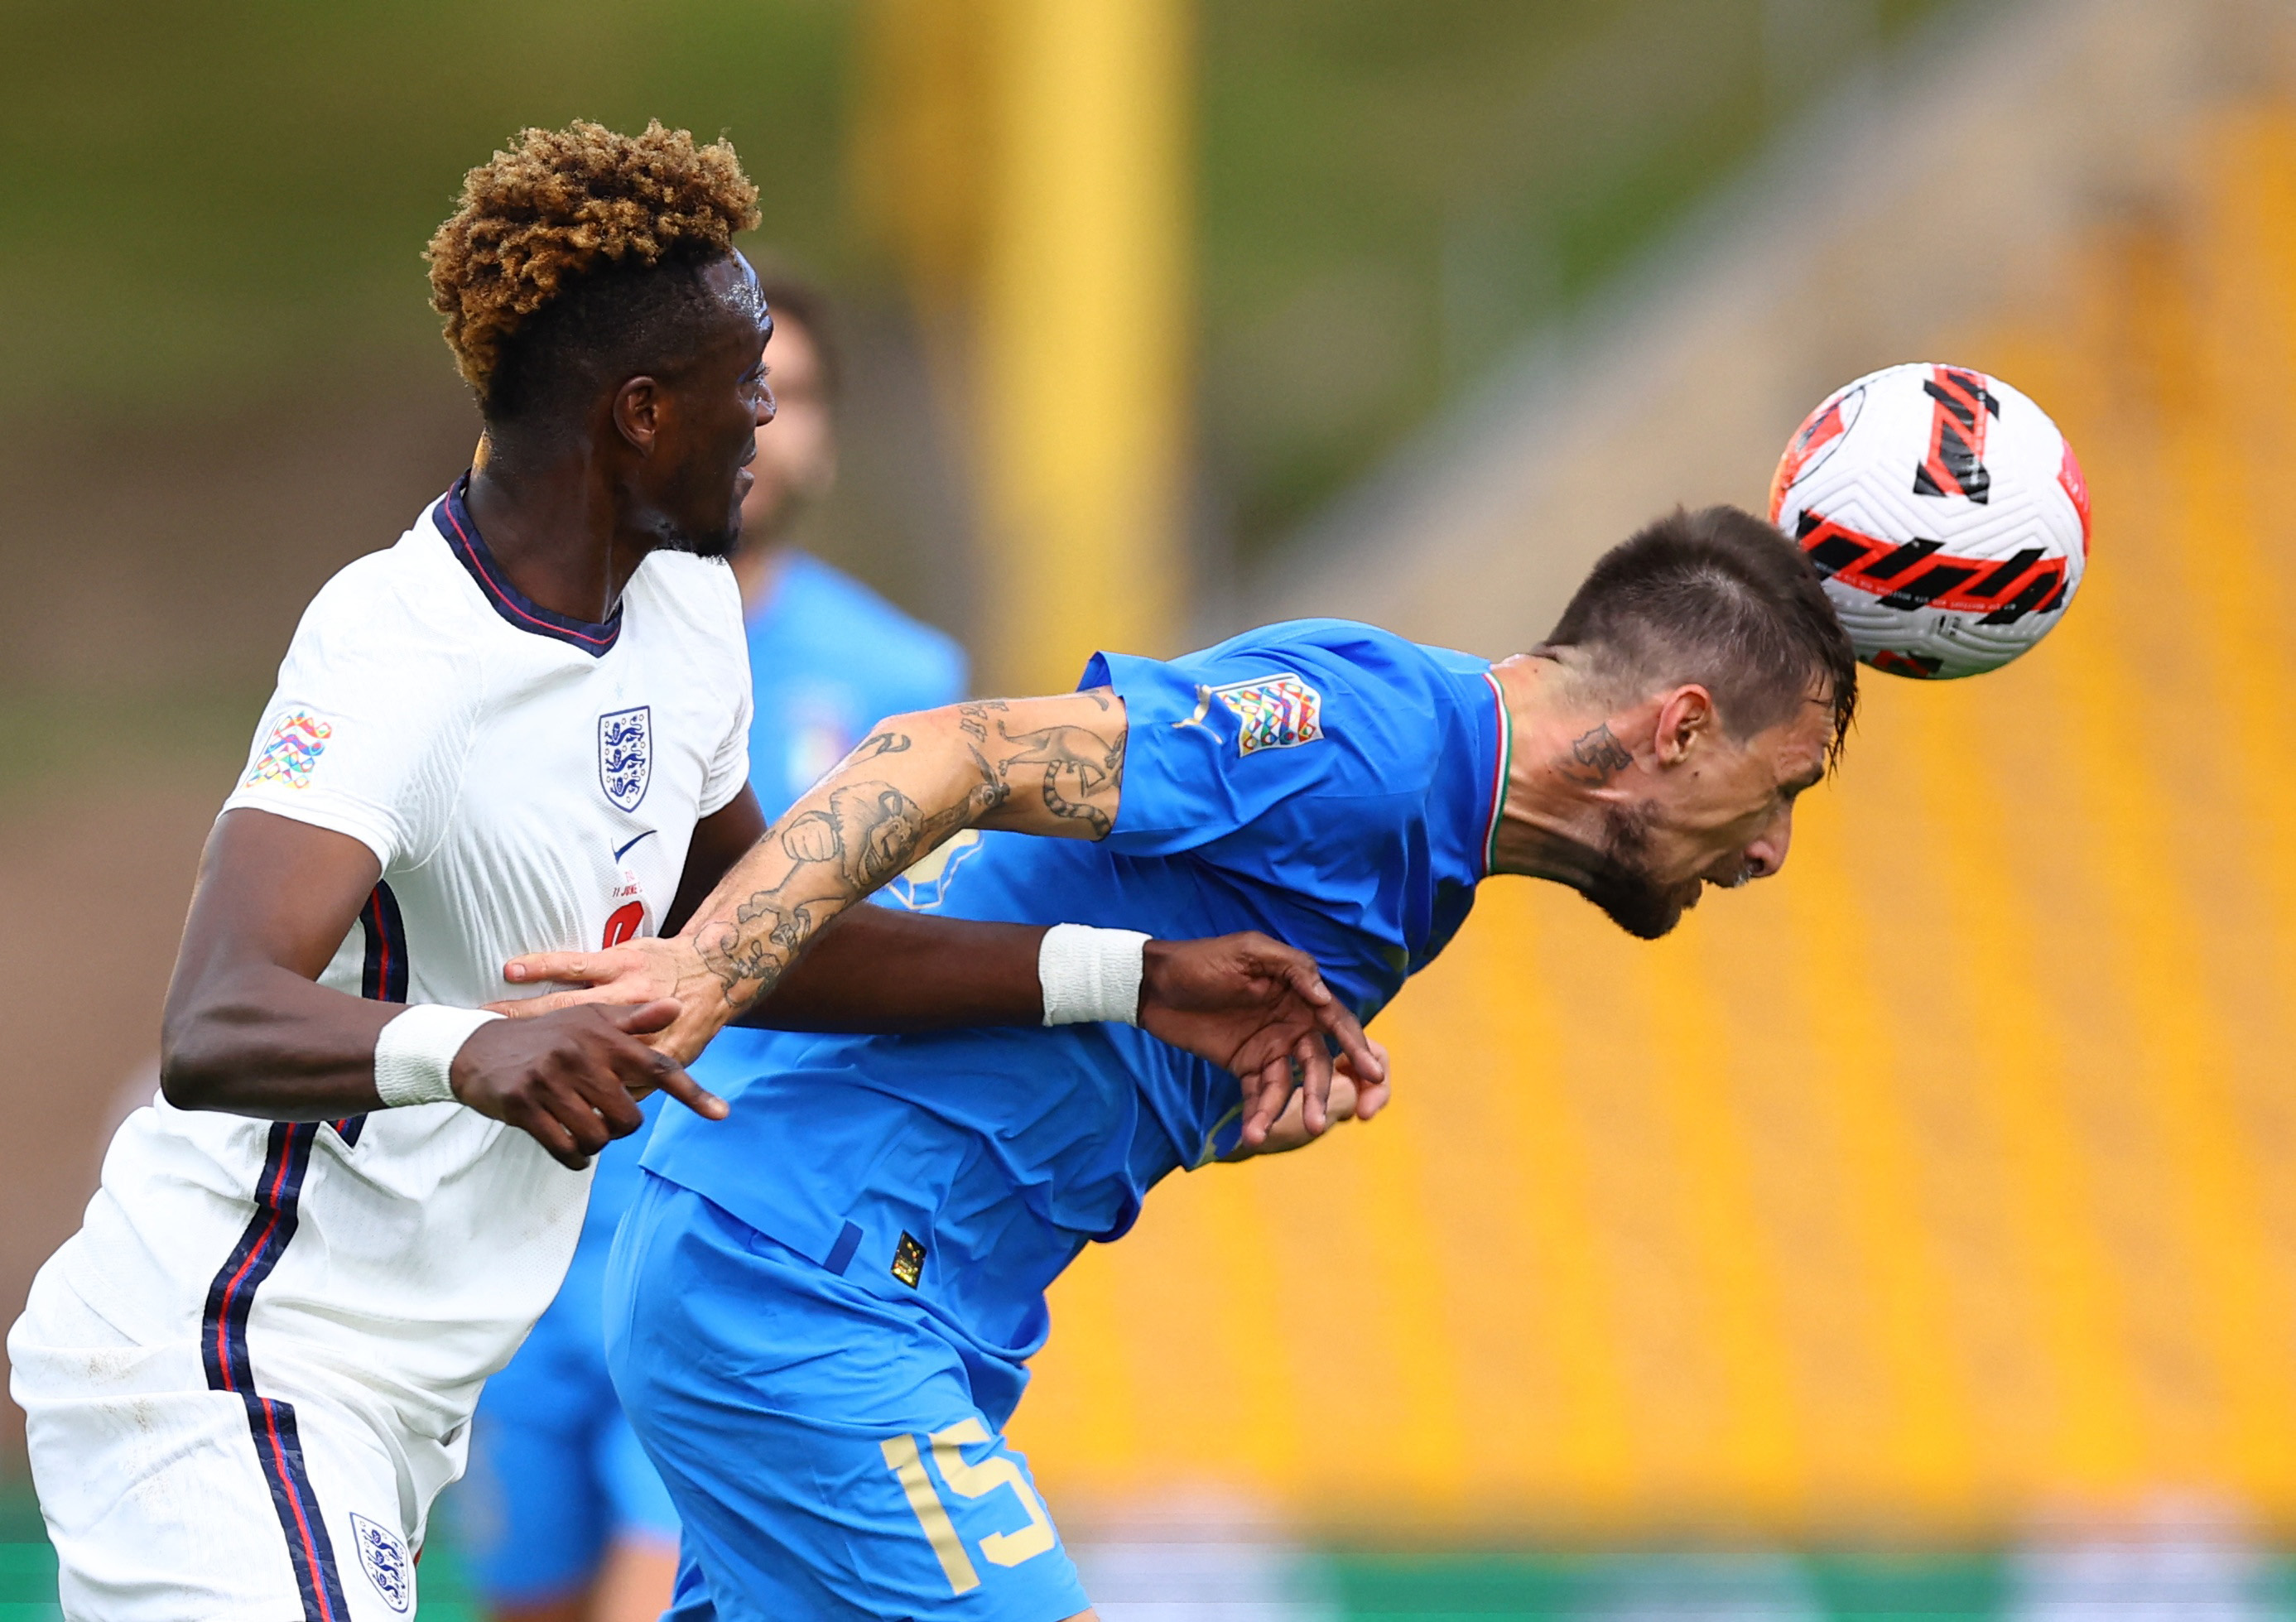 Soccer Football - UEFA Nations League - Group C - England v Italy - Molineux Stadium, Wolverhampton, Britain - June 11, 2022 England's Tammy Abraham in action with Italy's Francesco Acerbi REUTERS/Hannah Mckay